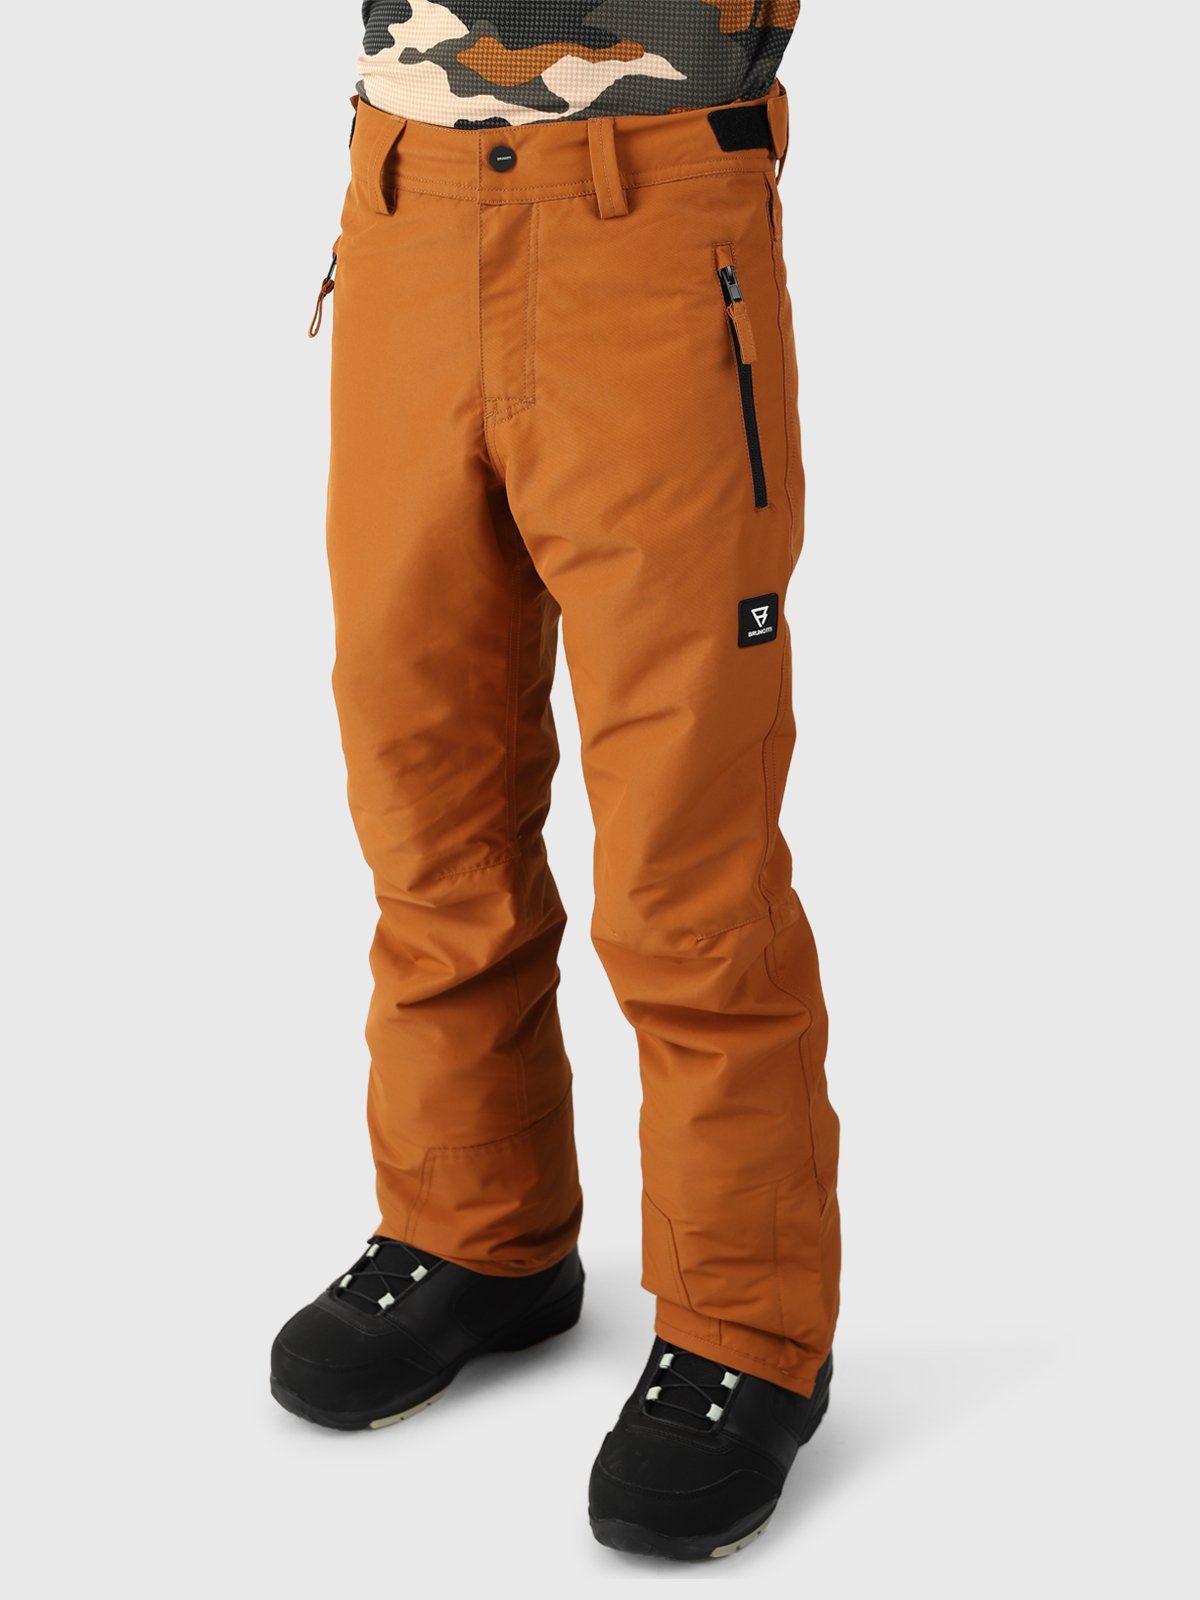 Skihose Boys Snow Brunotti Pant Footraily TABACCO